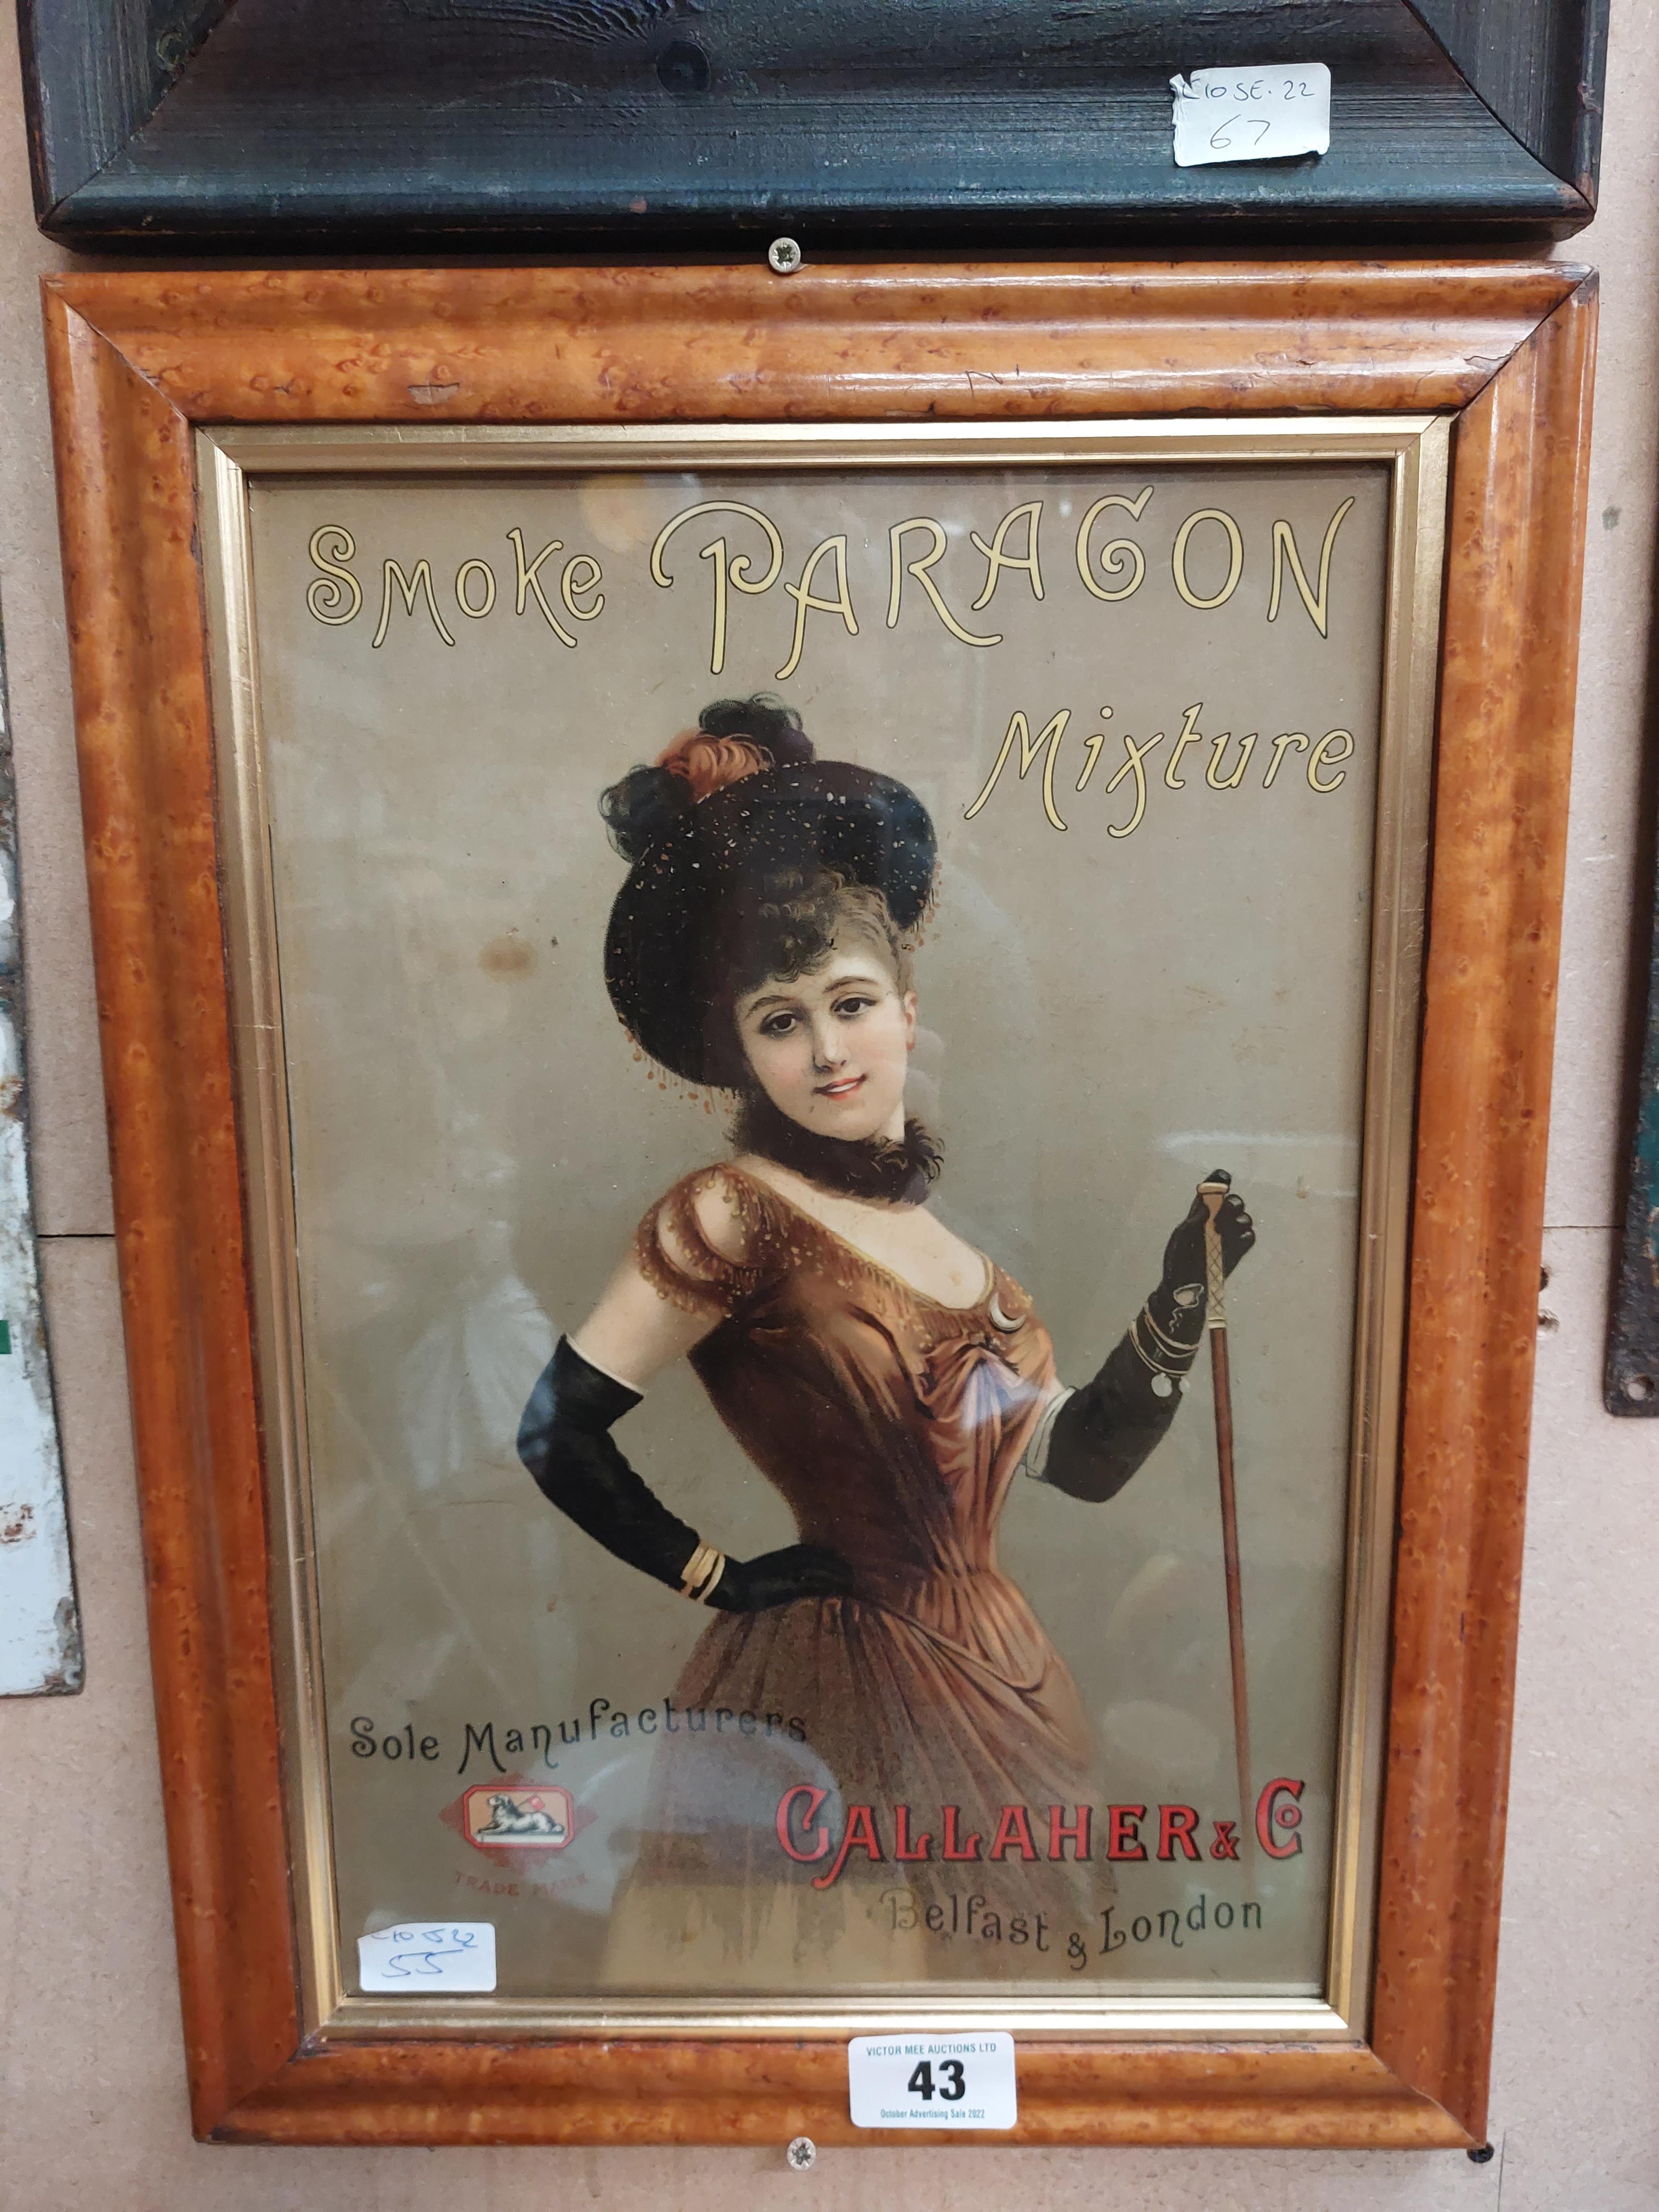 Smoke Paragon Mixture Gallagher & Co. Cigarettes framed advertising show card {51 cm H x 37 cm W}.